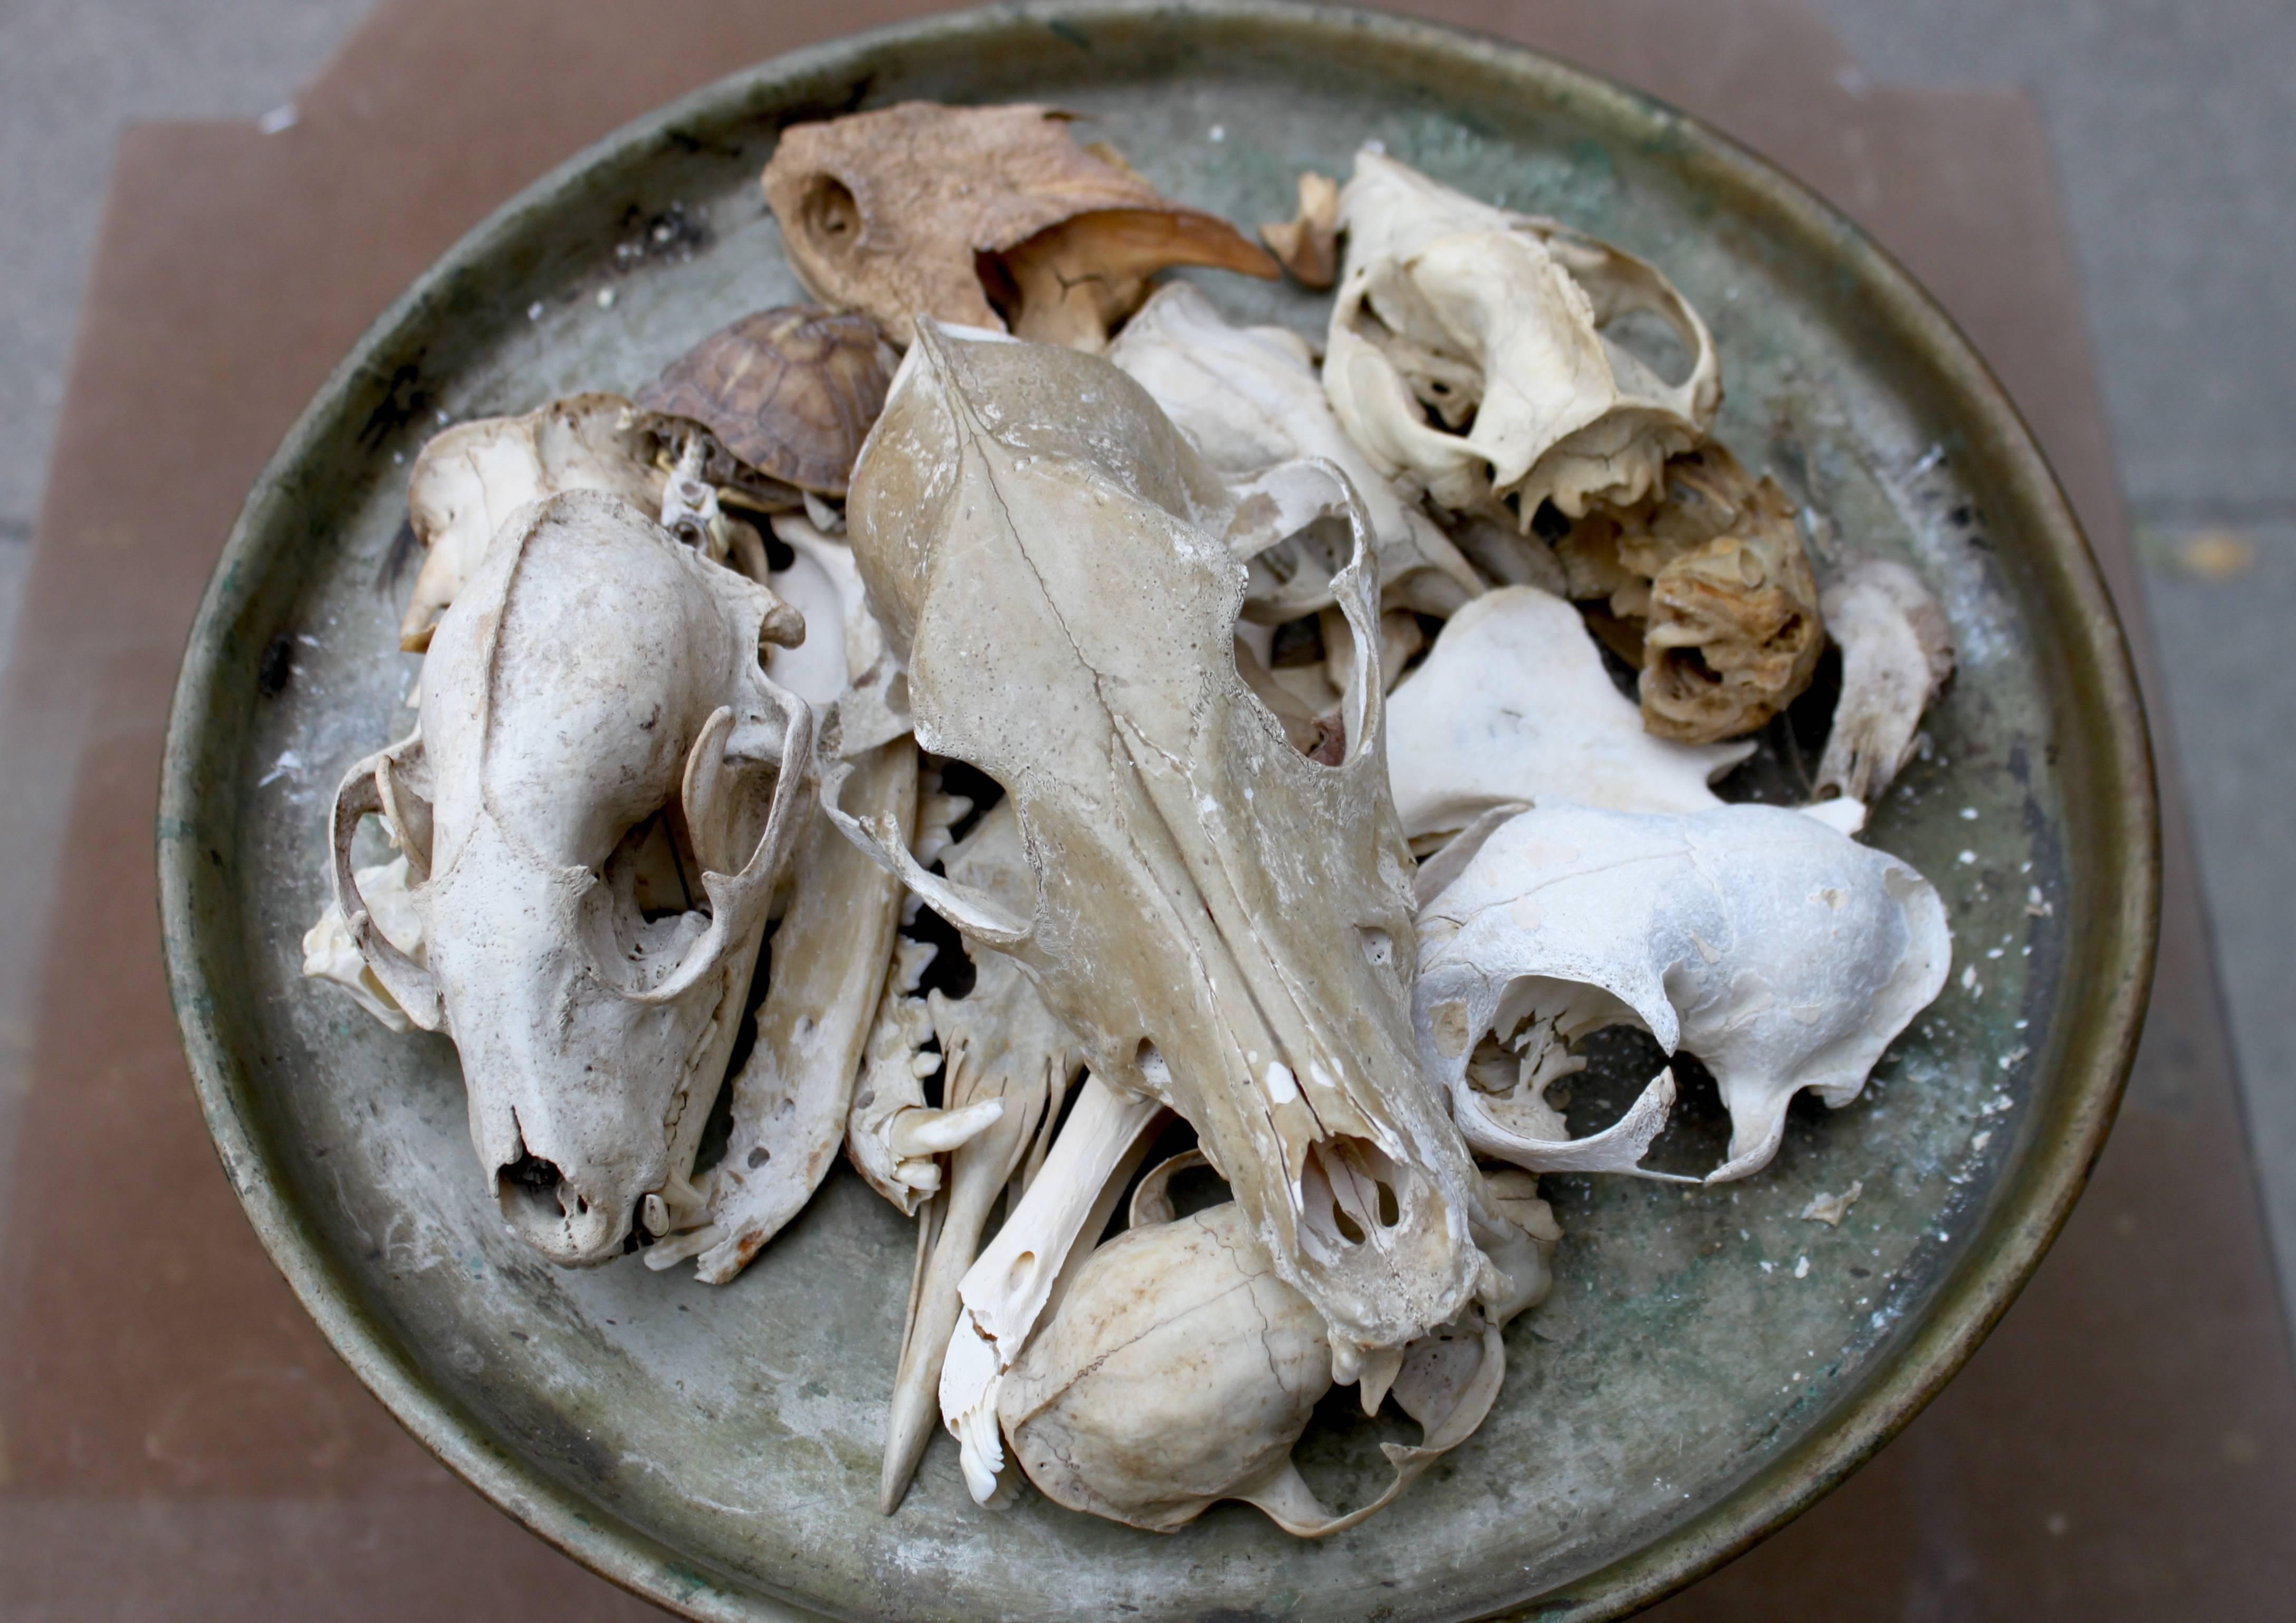 Cabinet of Curiosities:
Reptile and mammal skulls and bones of diverse species on brass platter.